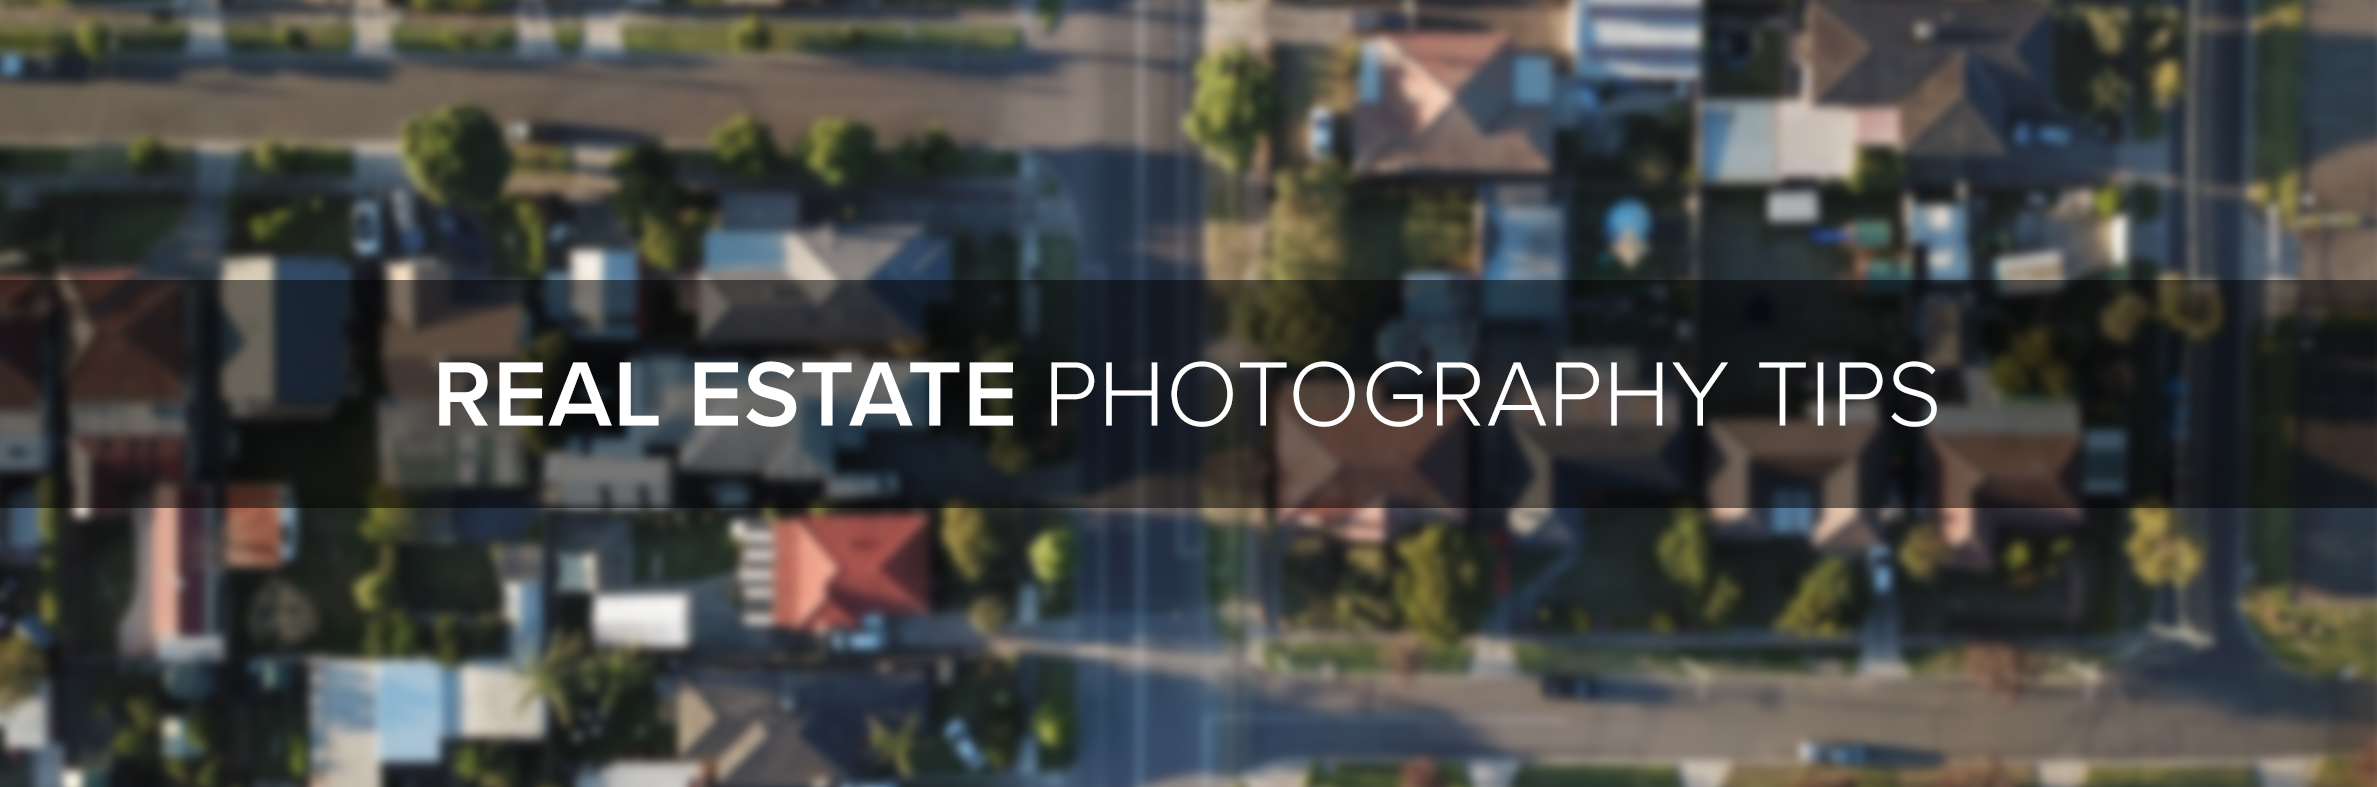 D1 Store Real Estate Photography Tips